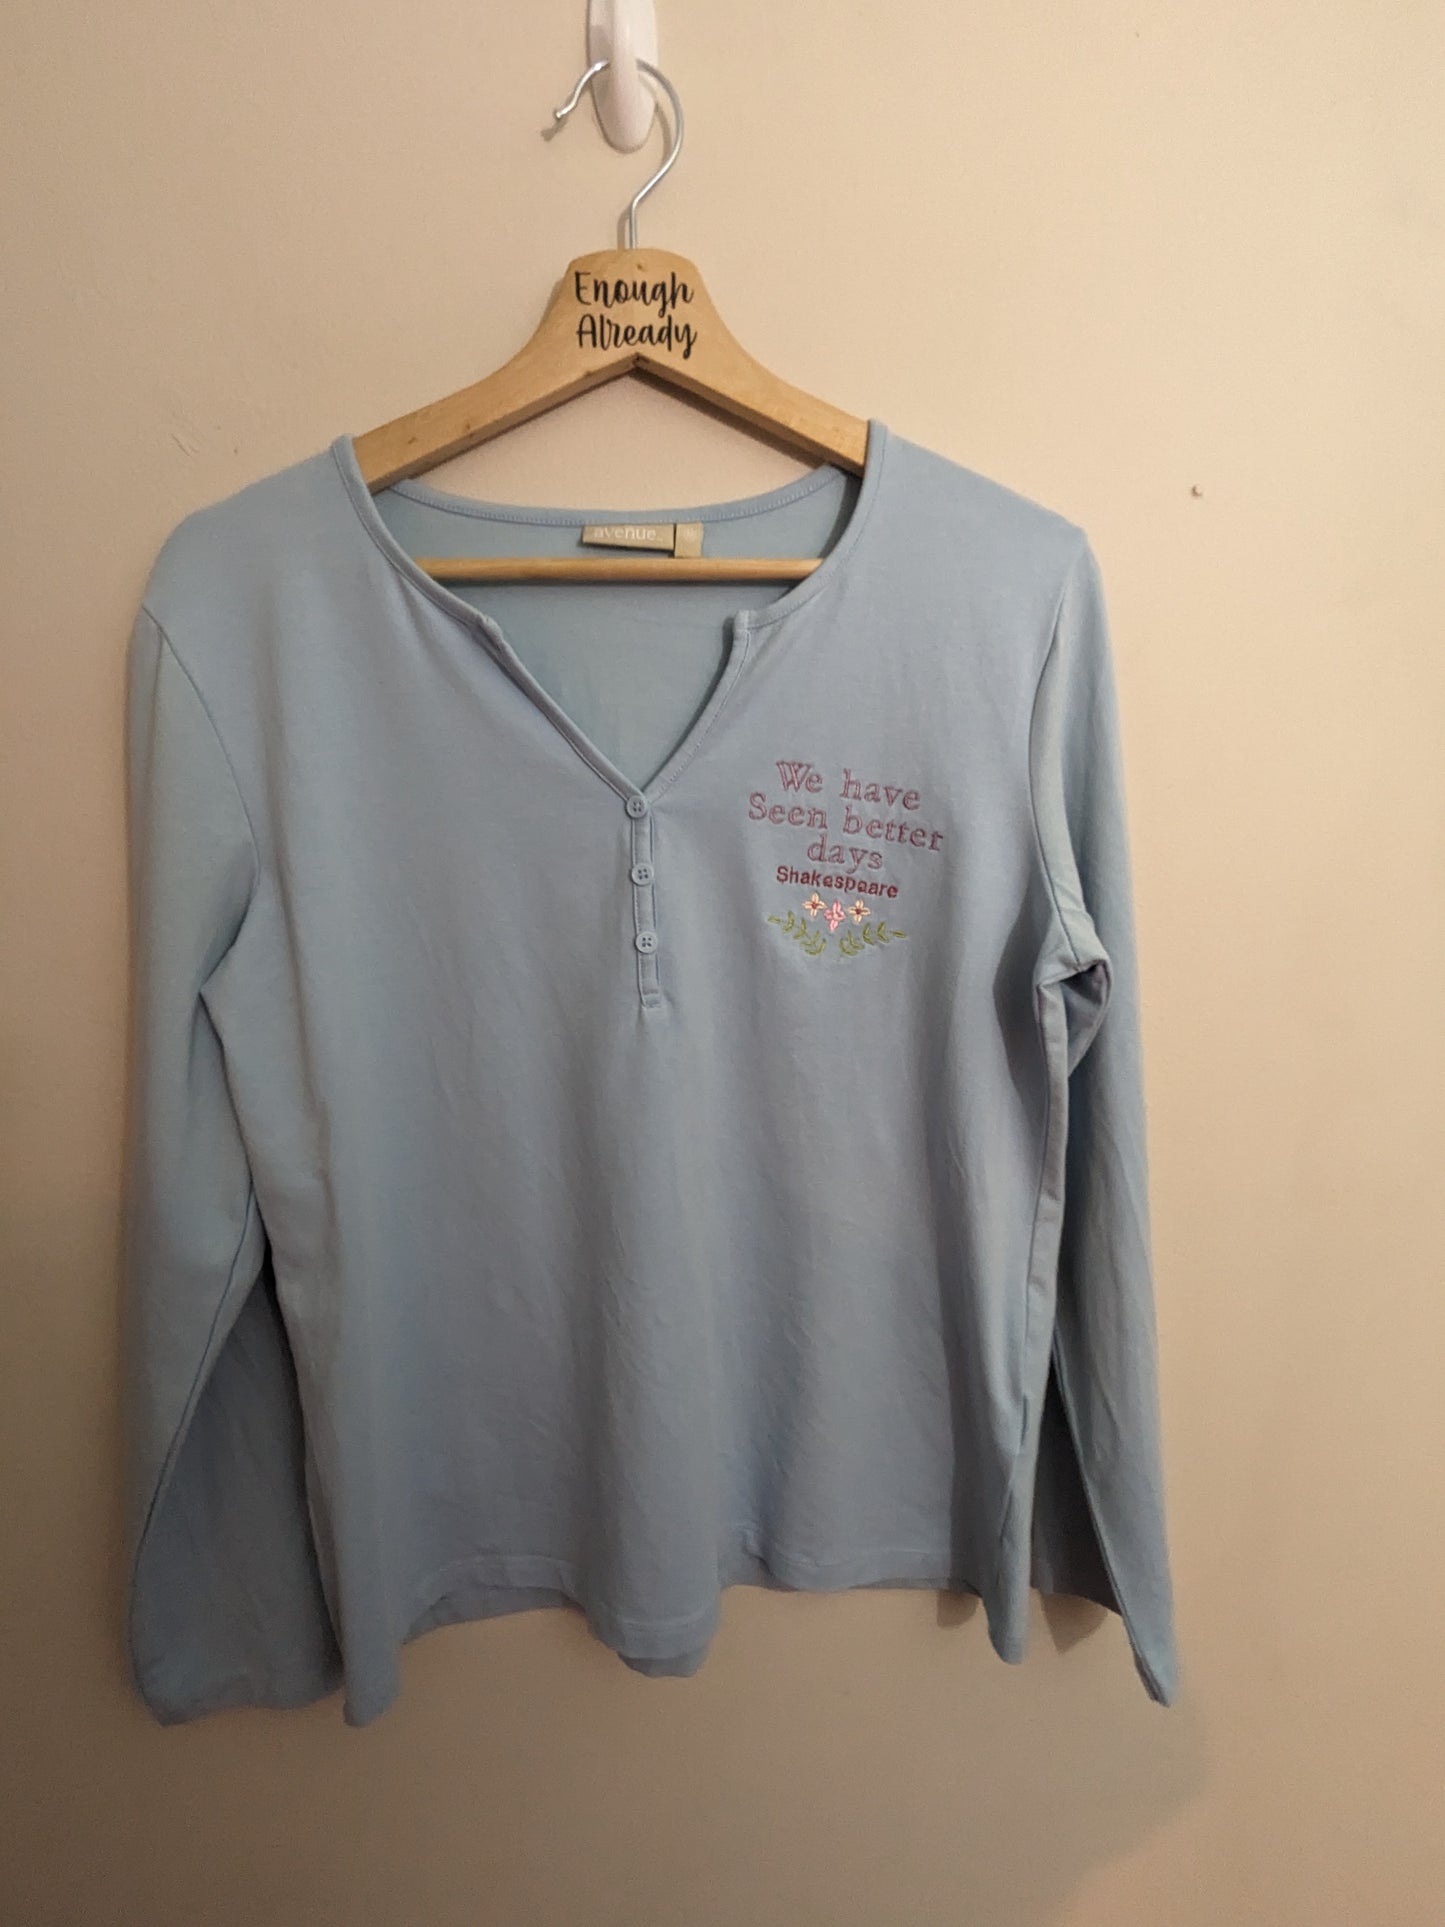 Size M Light Blue William Shakespeare Light Long Sleeve Top - Upcycled and Embroidered